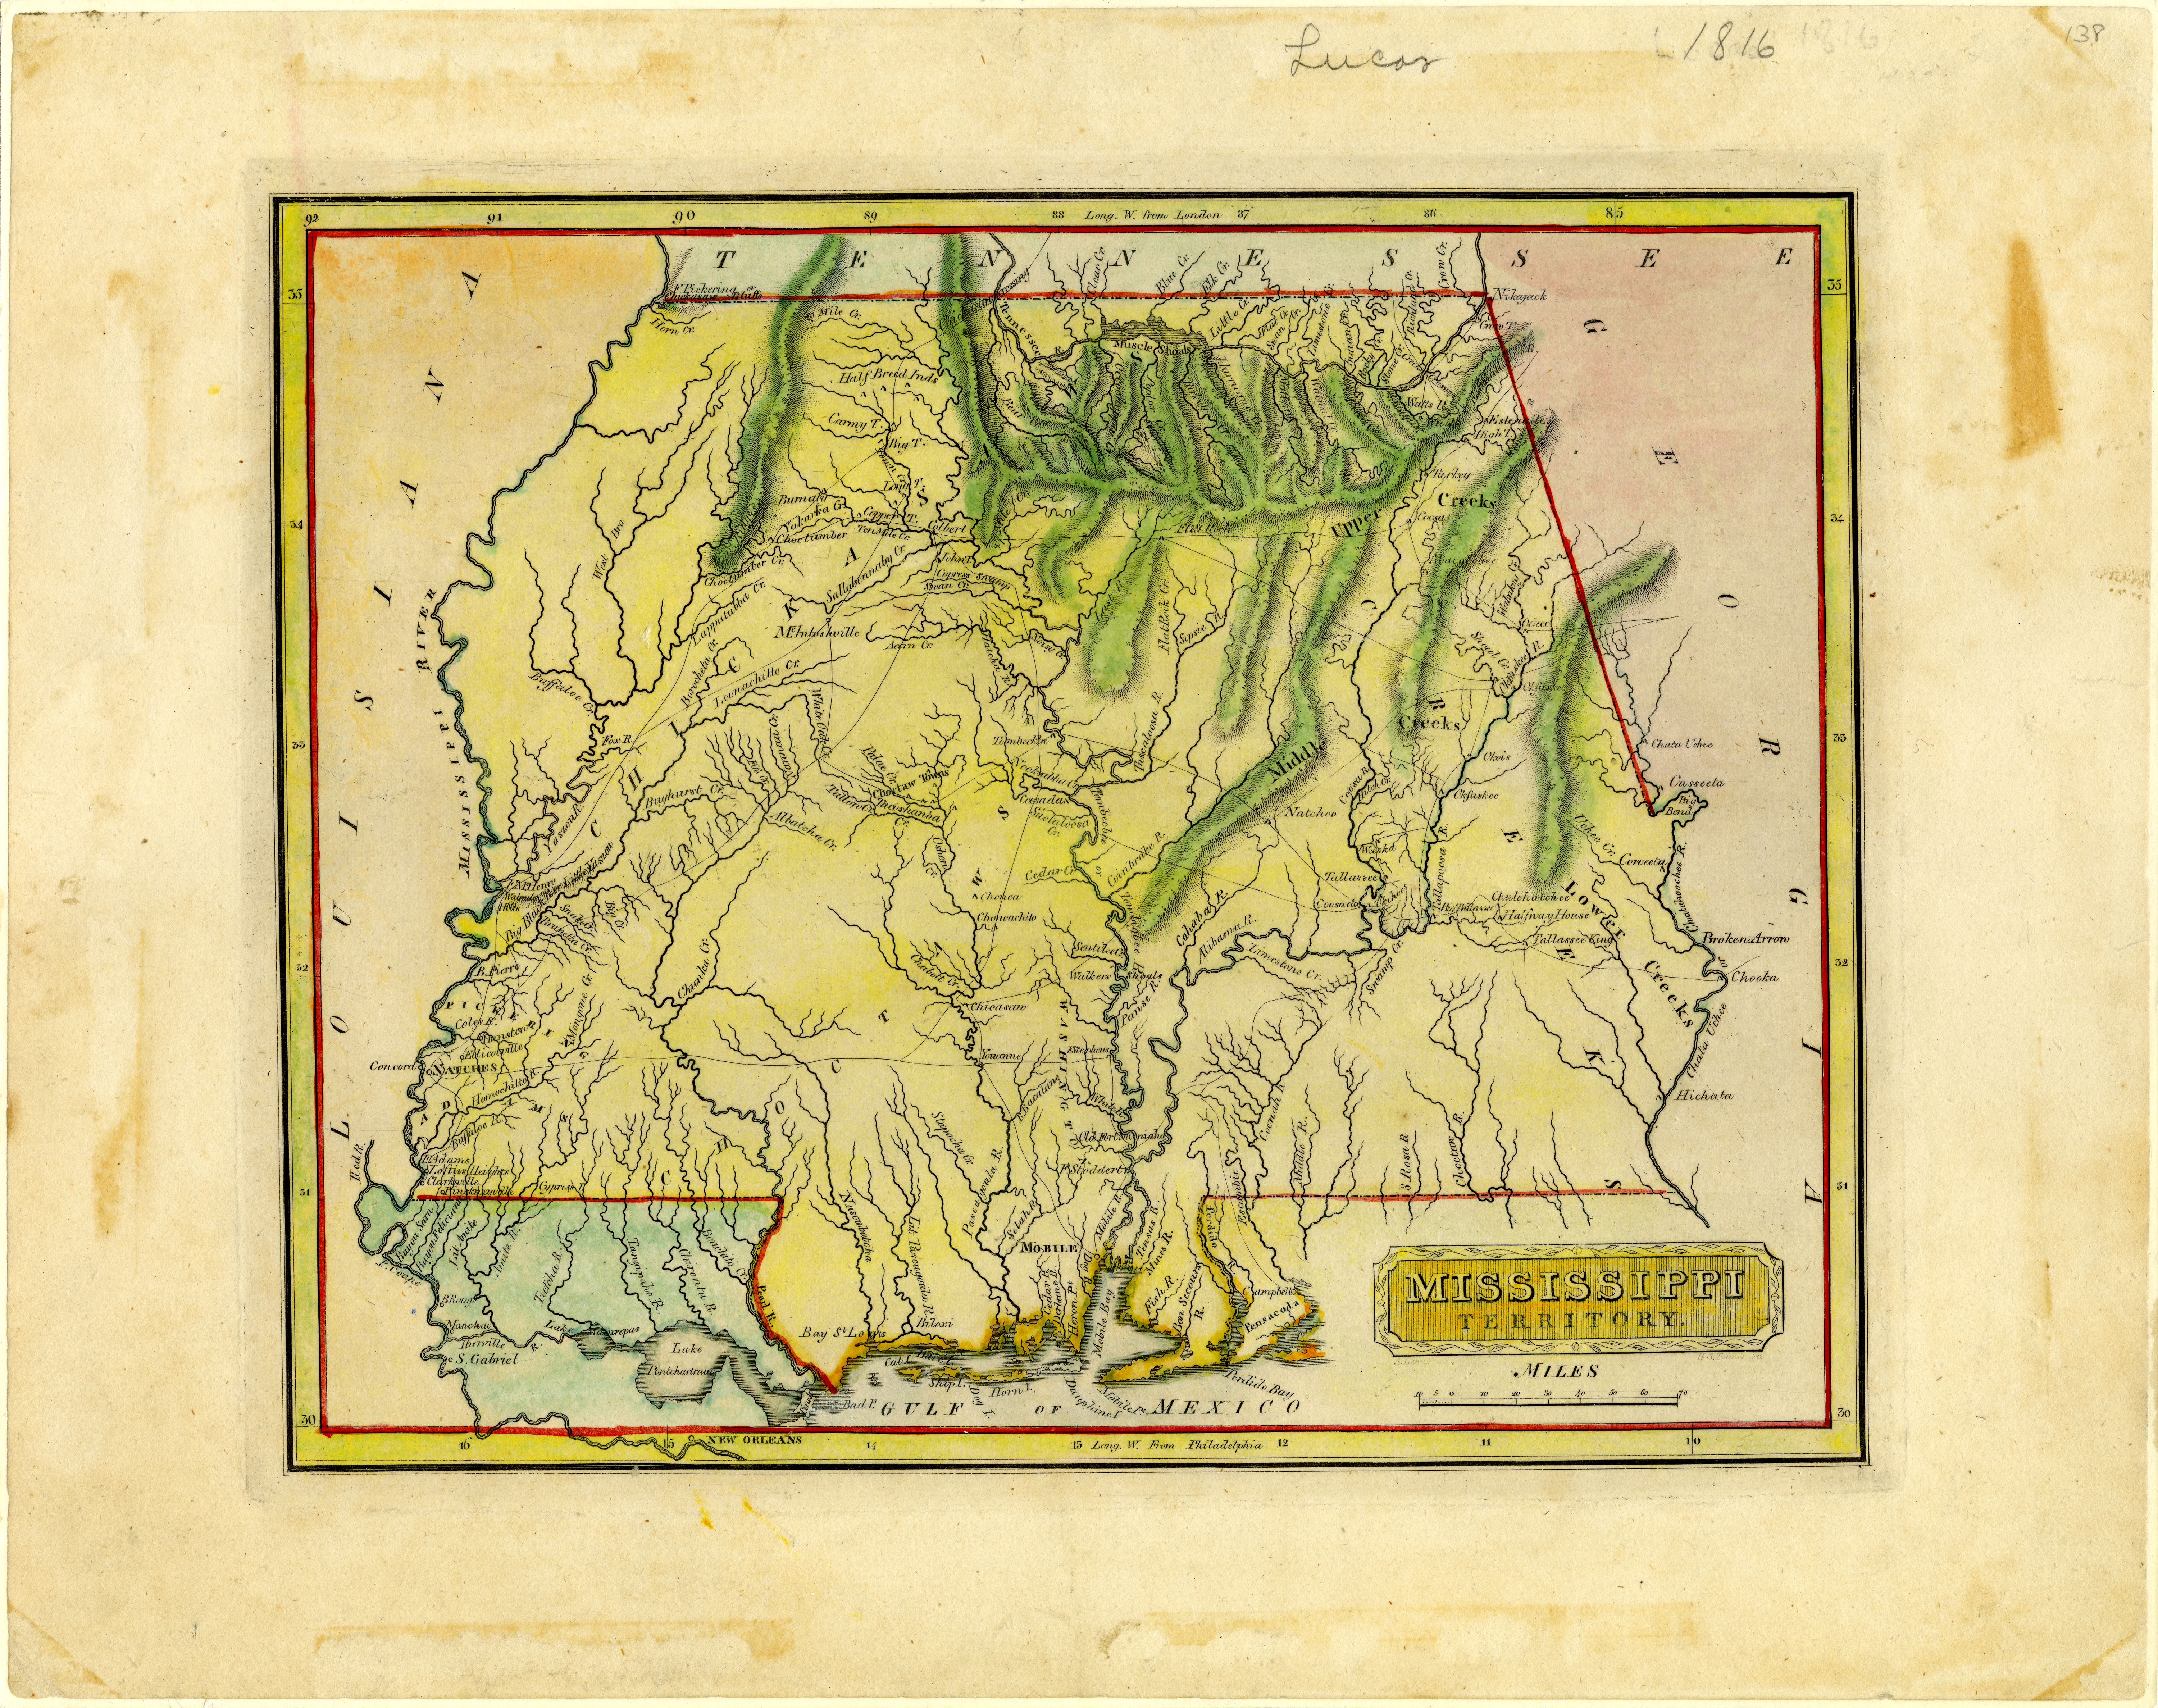 Map of the Mississippi Territory in 1816 created by Fielding Lucas. Courtesy Mississippi Department Archives and History.